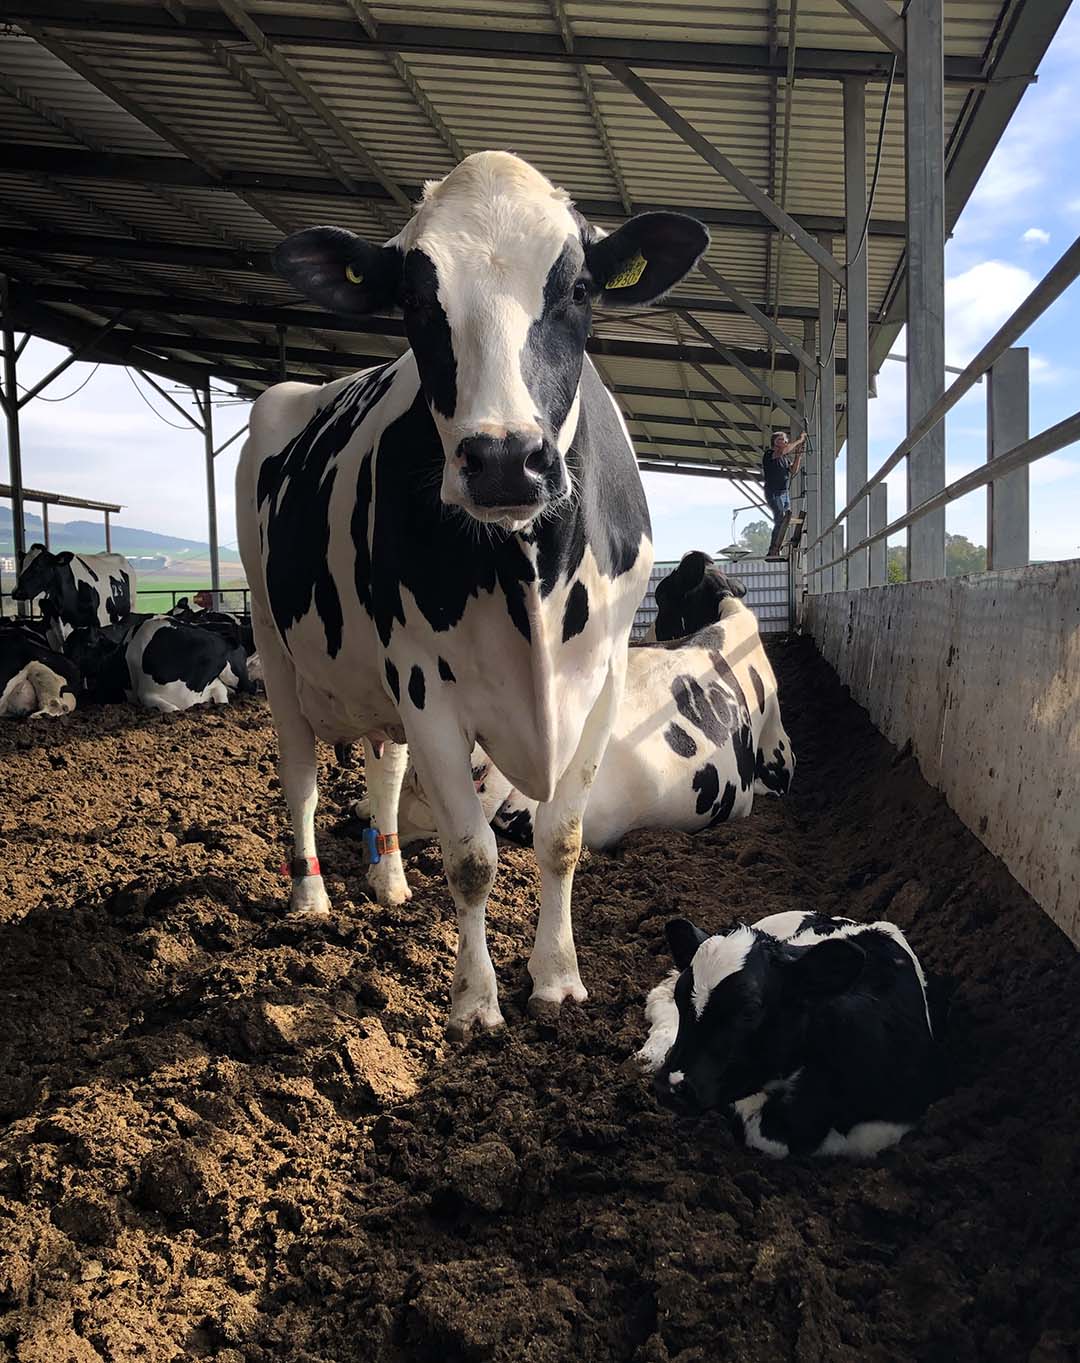 Both cow and calf can achieve better health and welfare when kept together.